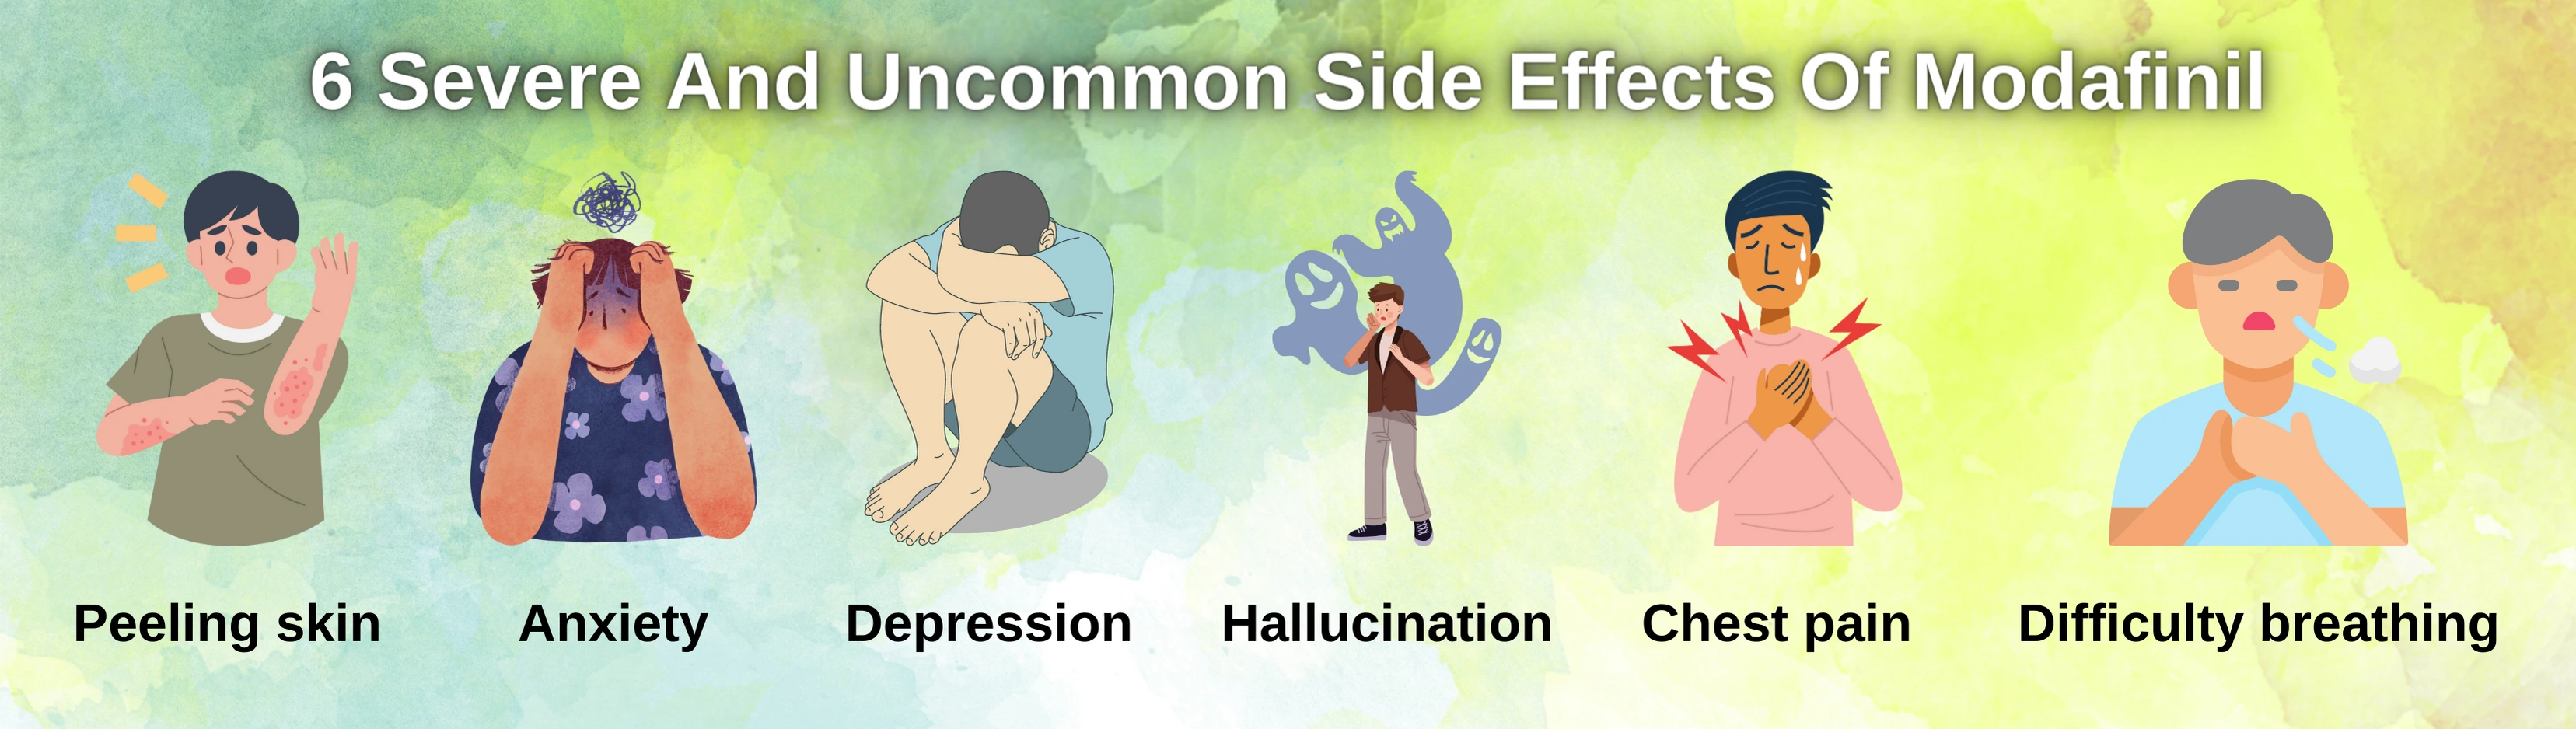 6-severe-and-uncommon-side-effects-of-modafinil